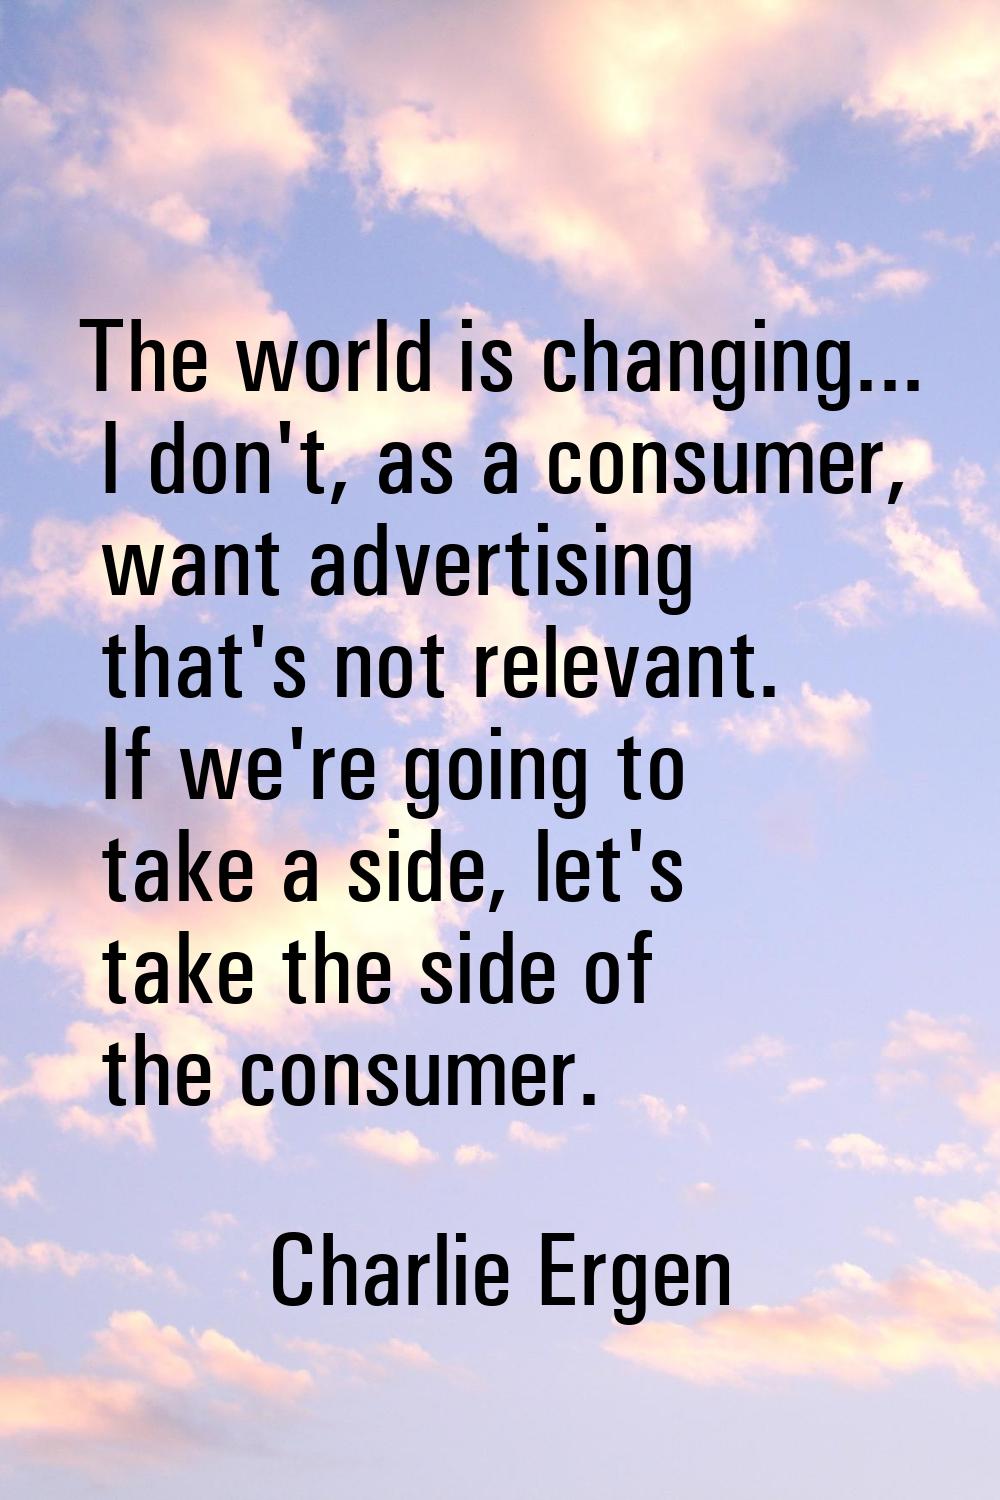 The world is changing... I don't, as a consumer, want advertising that's not relevant. If we're goi